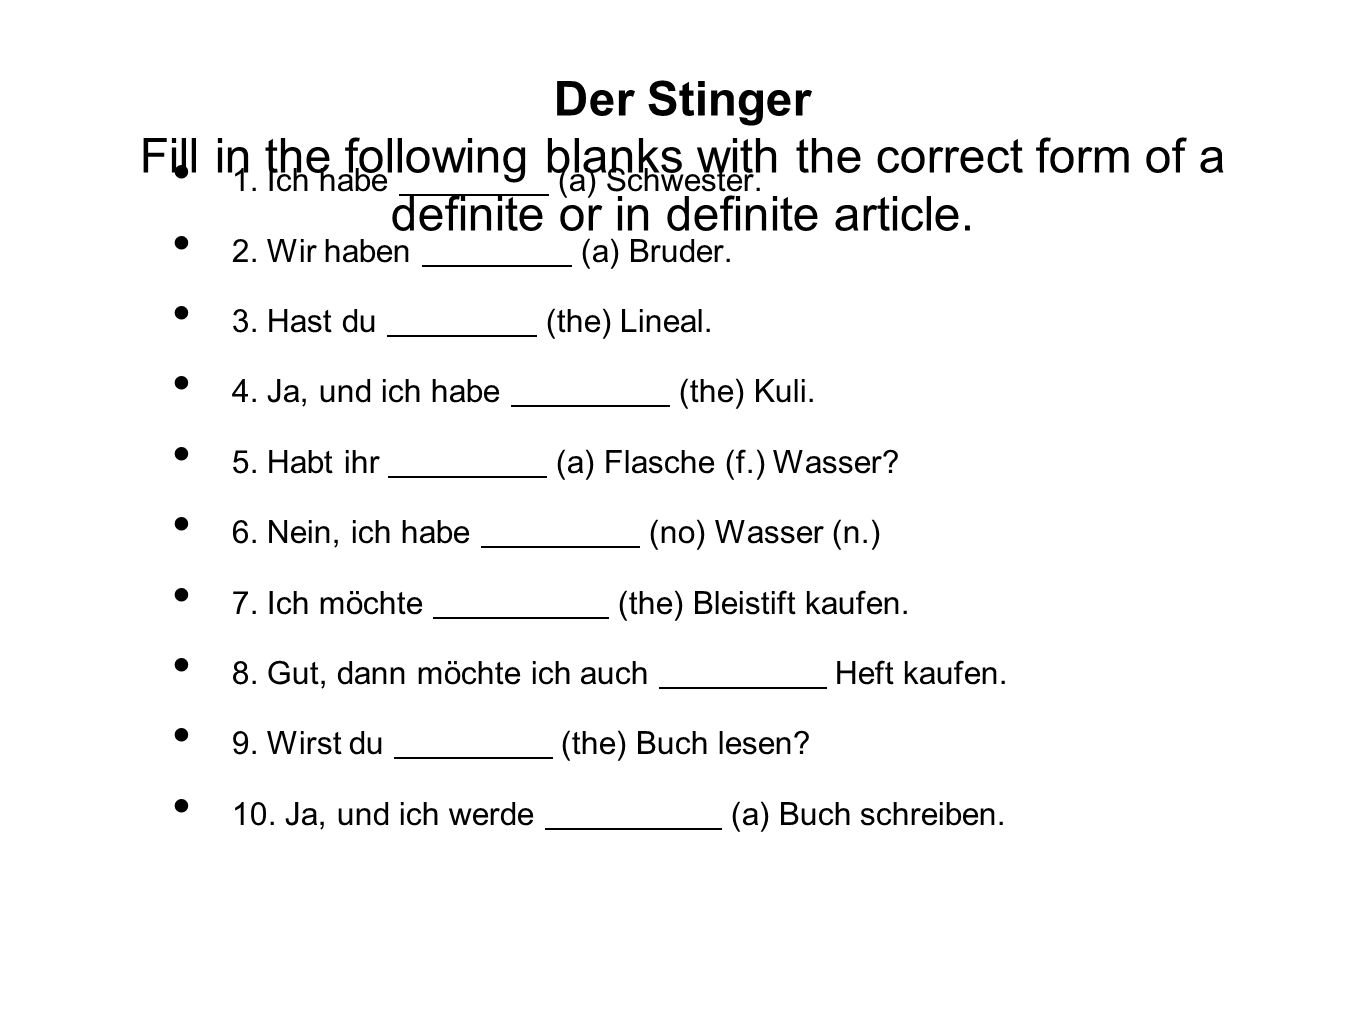 Der Stinger Fill in the following blanks with the correct form of a definite or in definite article.